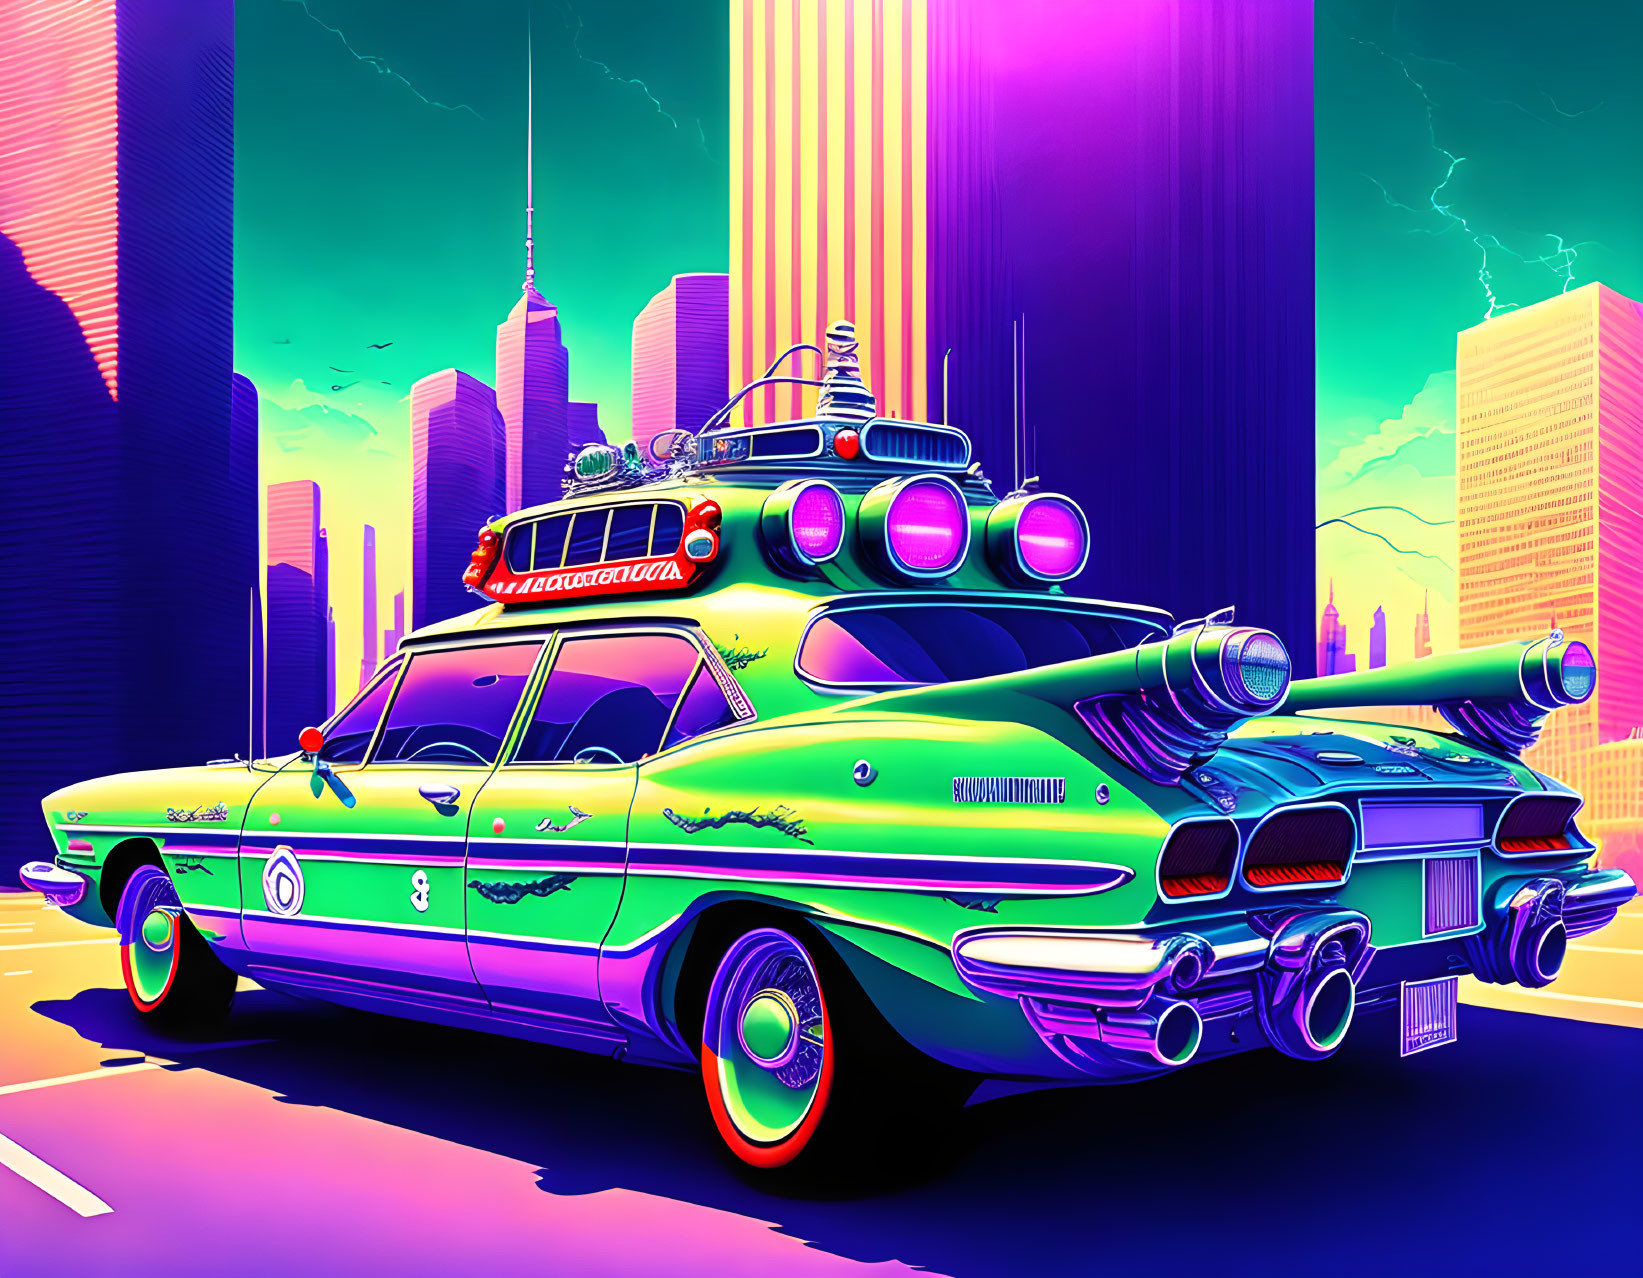 Colorful retro-futuristic car illustration in neon hues with advanced modifications against stylized skyscrapers